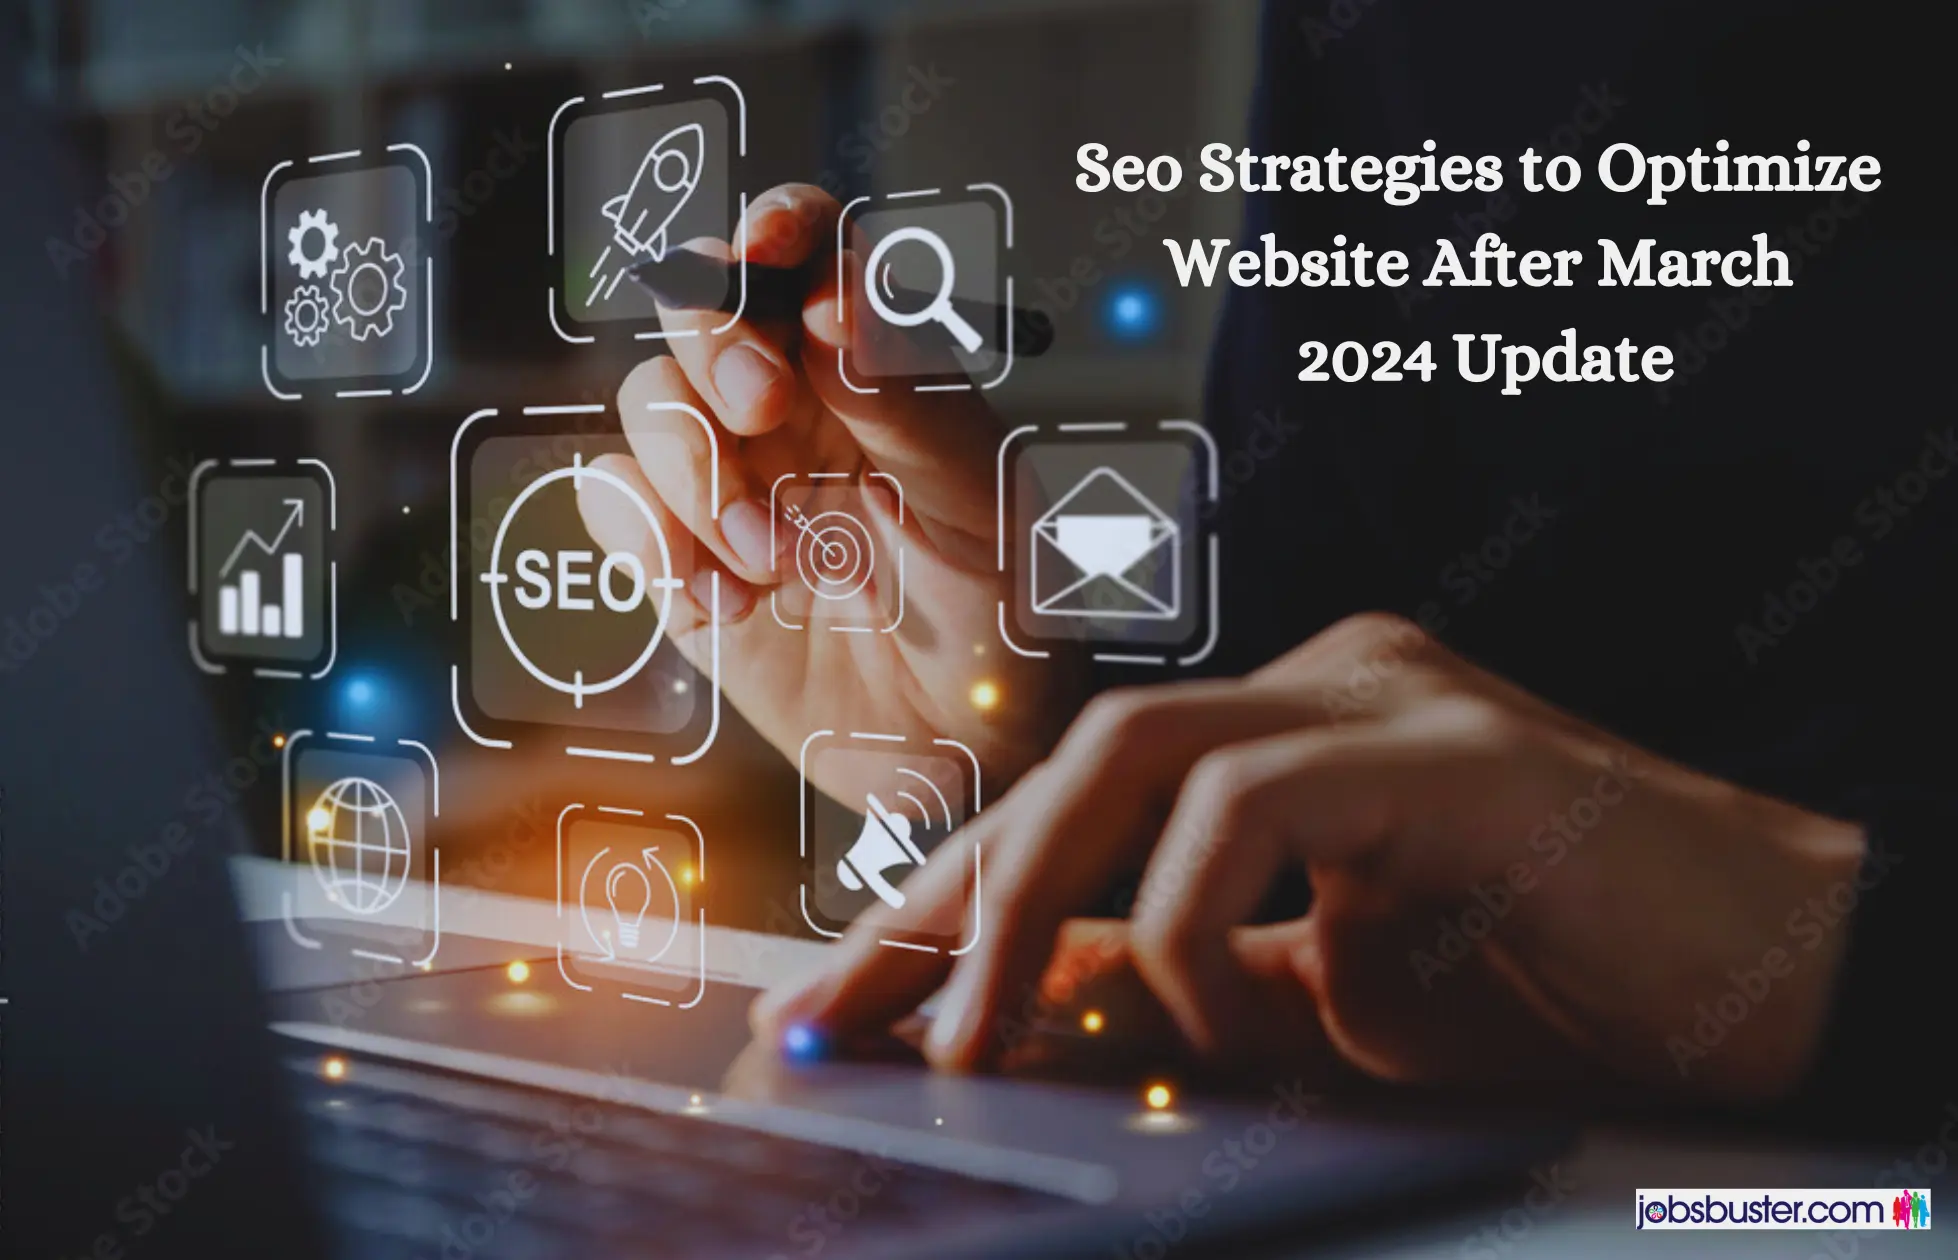 Seo Strategies to Optimize Website After March 2024 Update